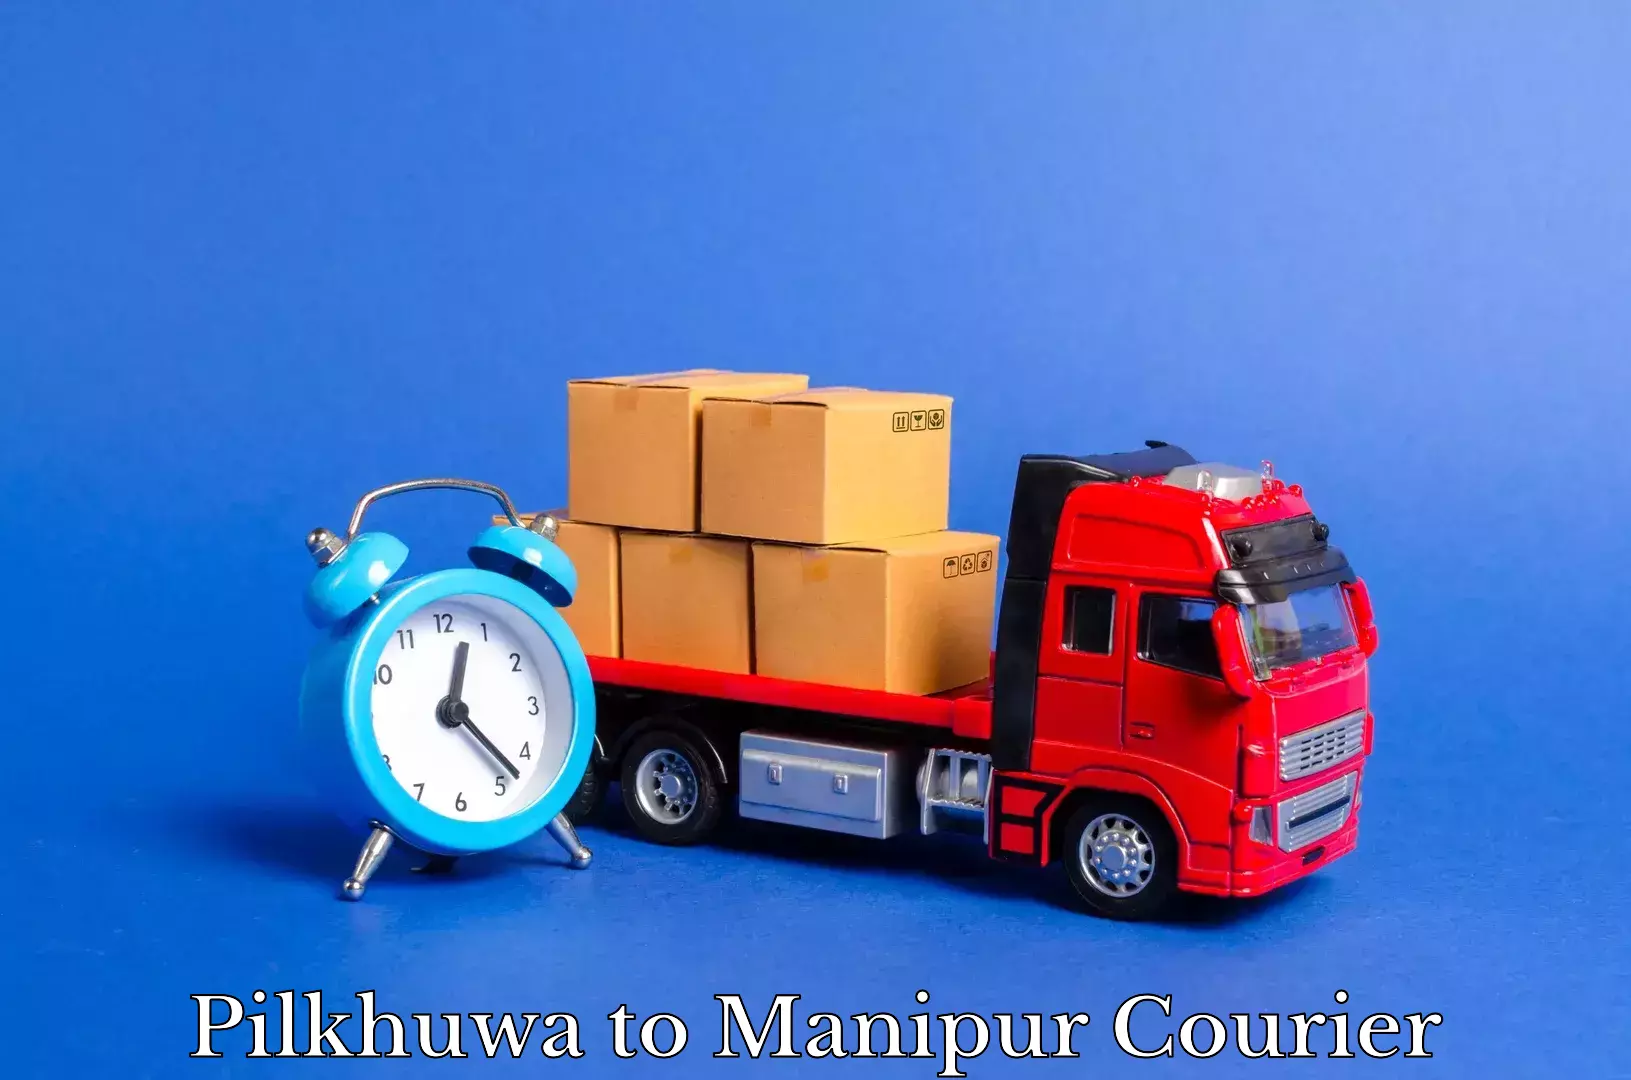 Dependable furniture movers Pilkhuwa to Manipur